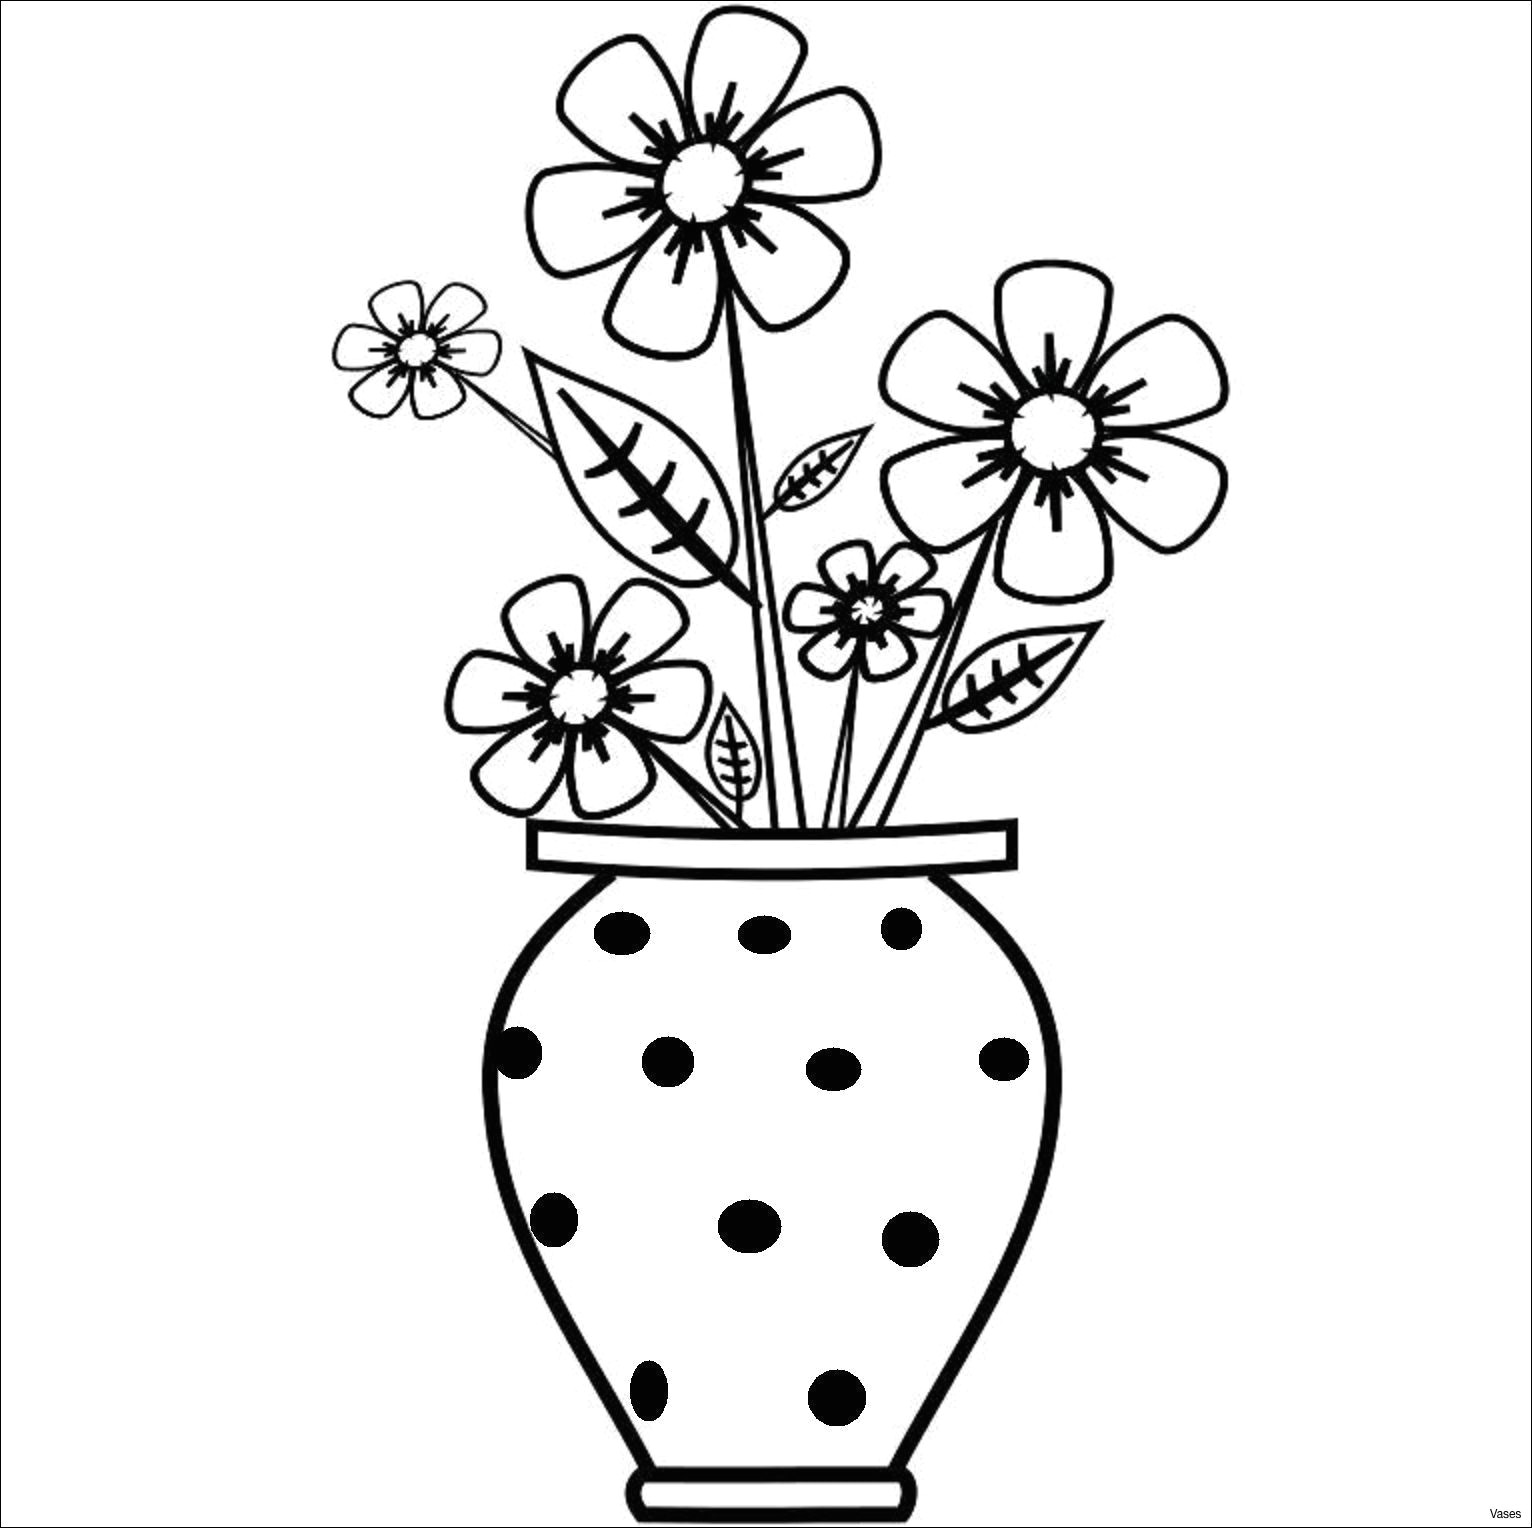 Drawing Of Easy Flower Pot Pics Of Drawings Easy Vase Art Drawings How to Draw A Vase Step 2h